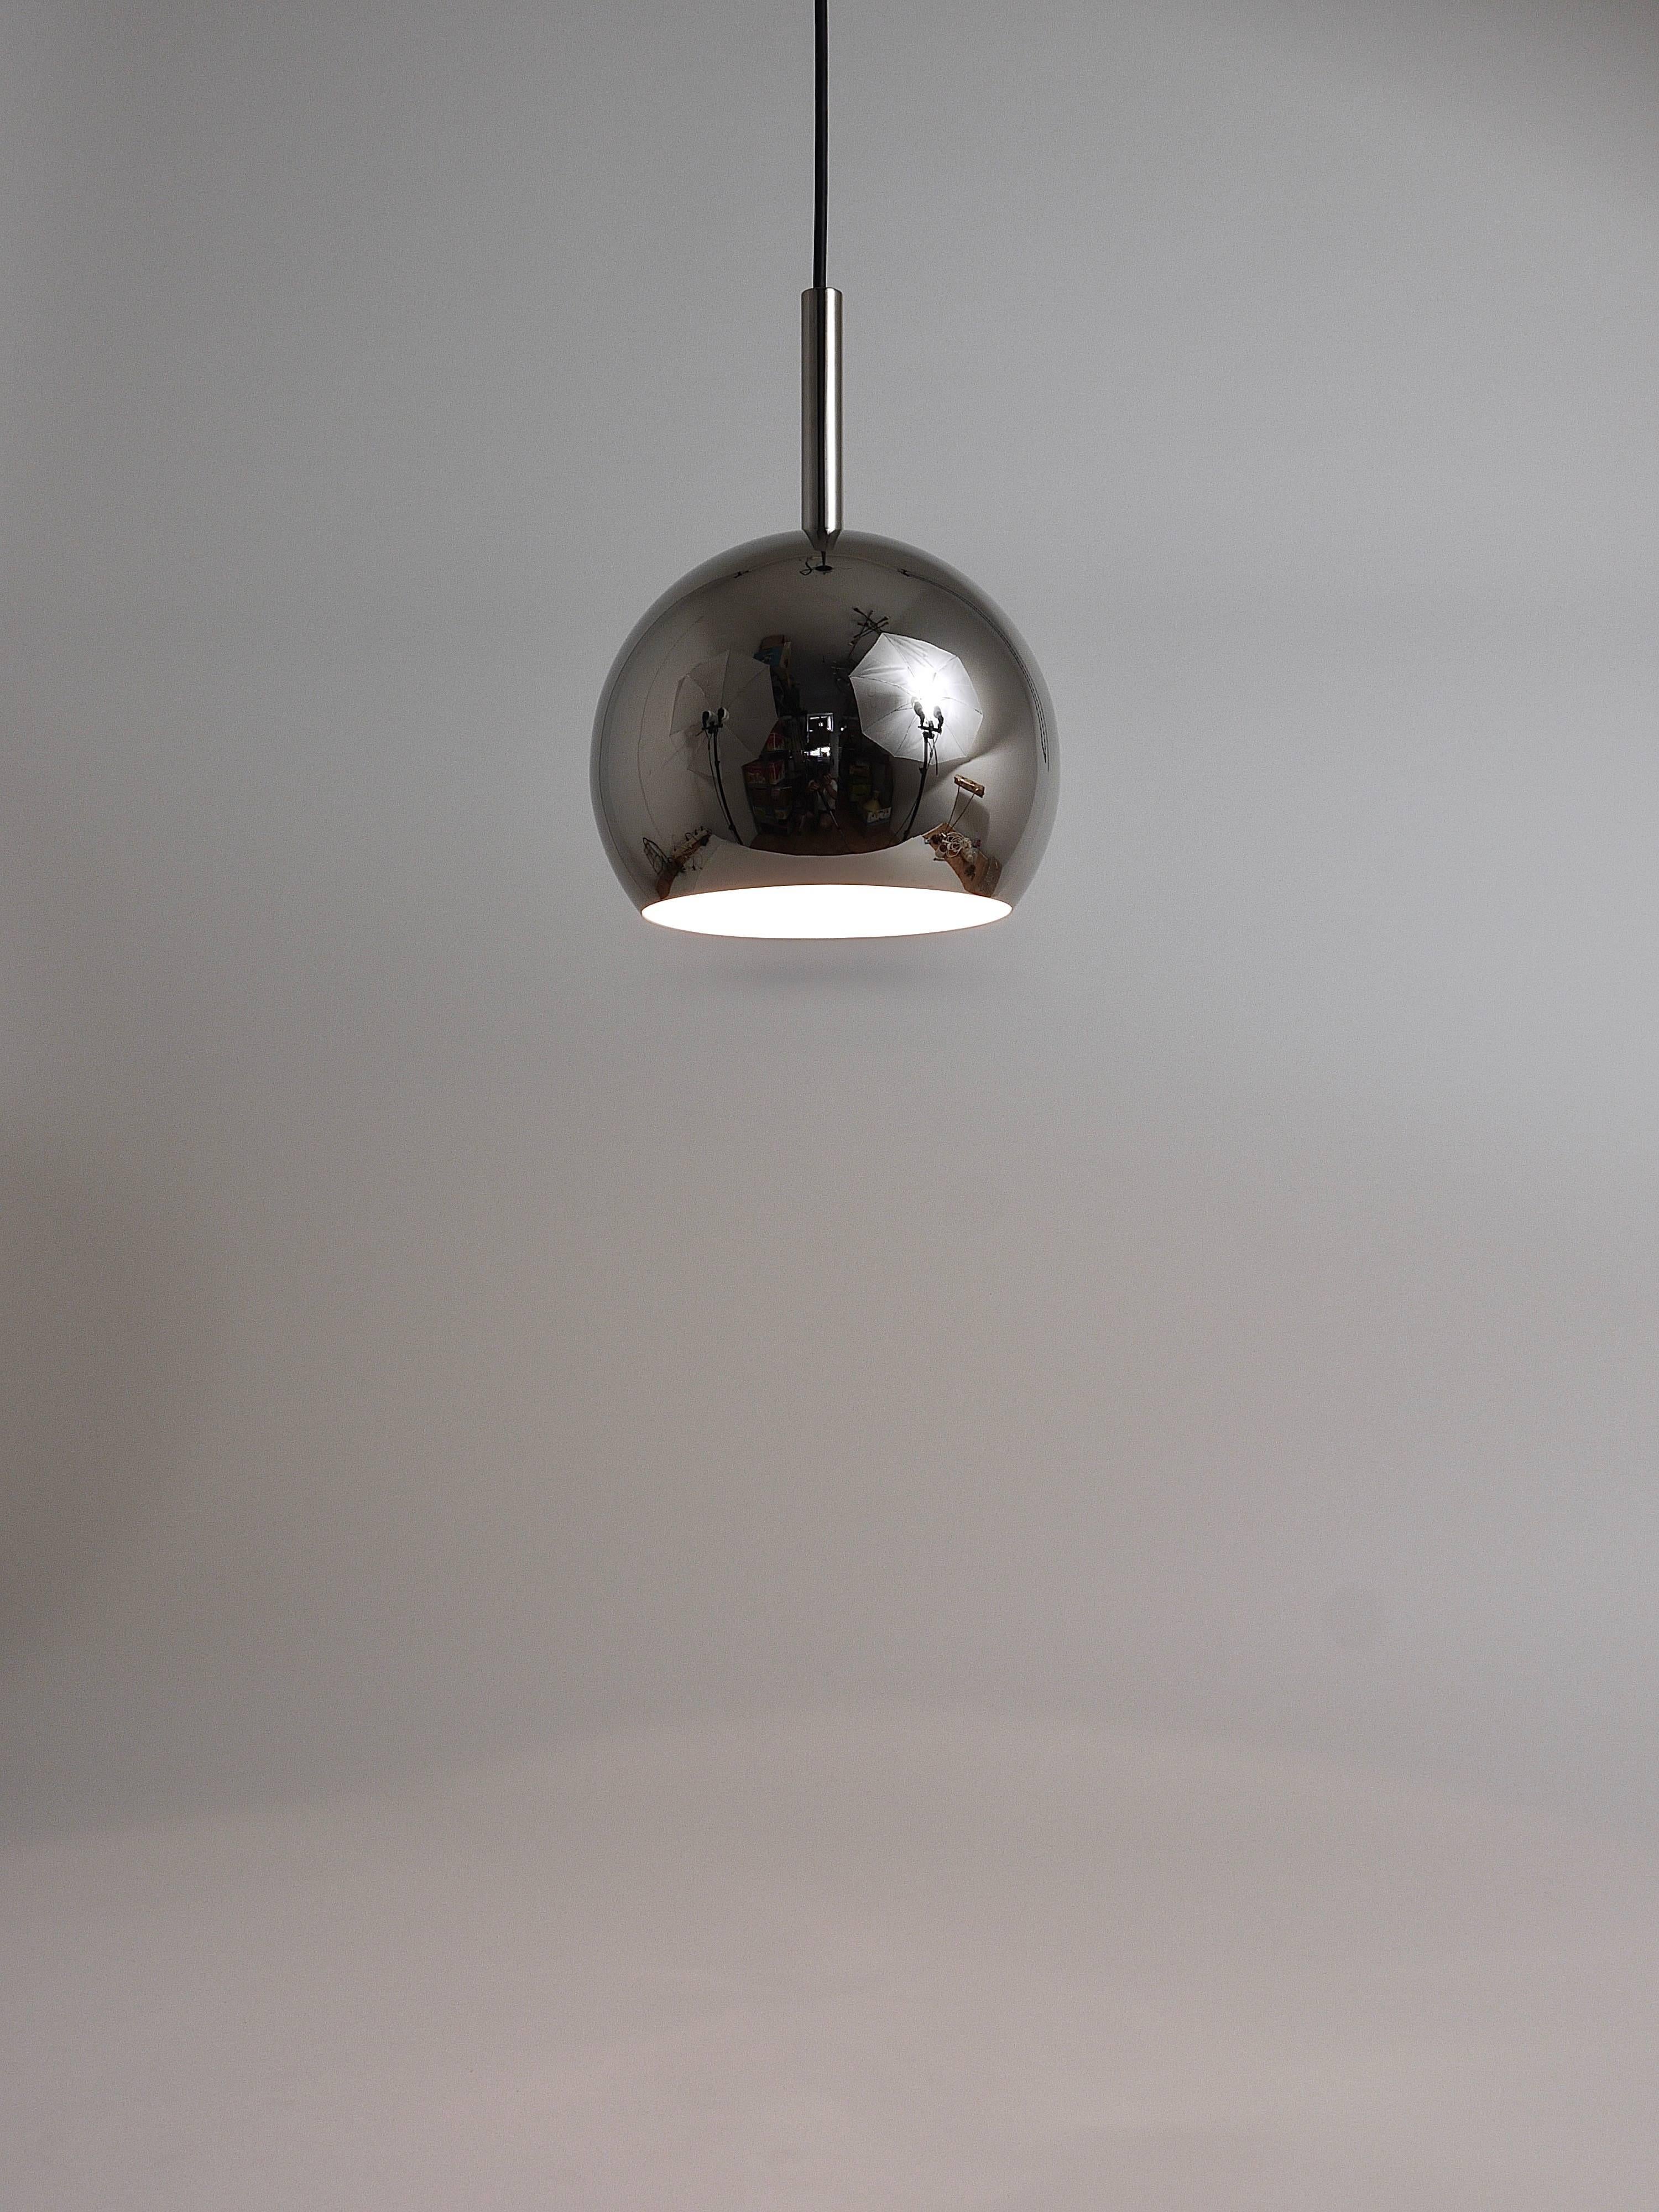 Metal Up to Three Identical Chromed Globe Pendant Lamps, Germany, 1970s